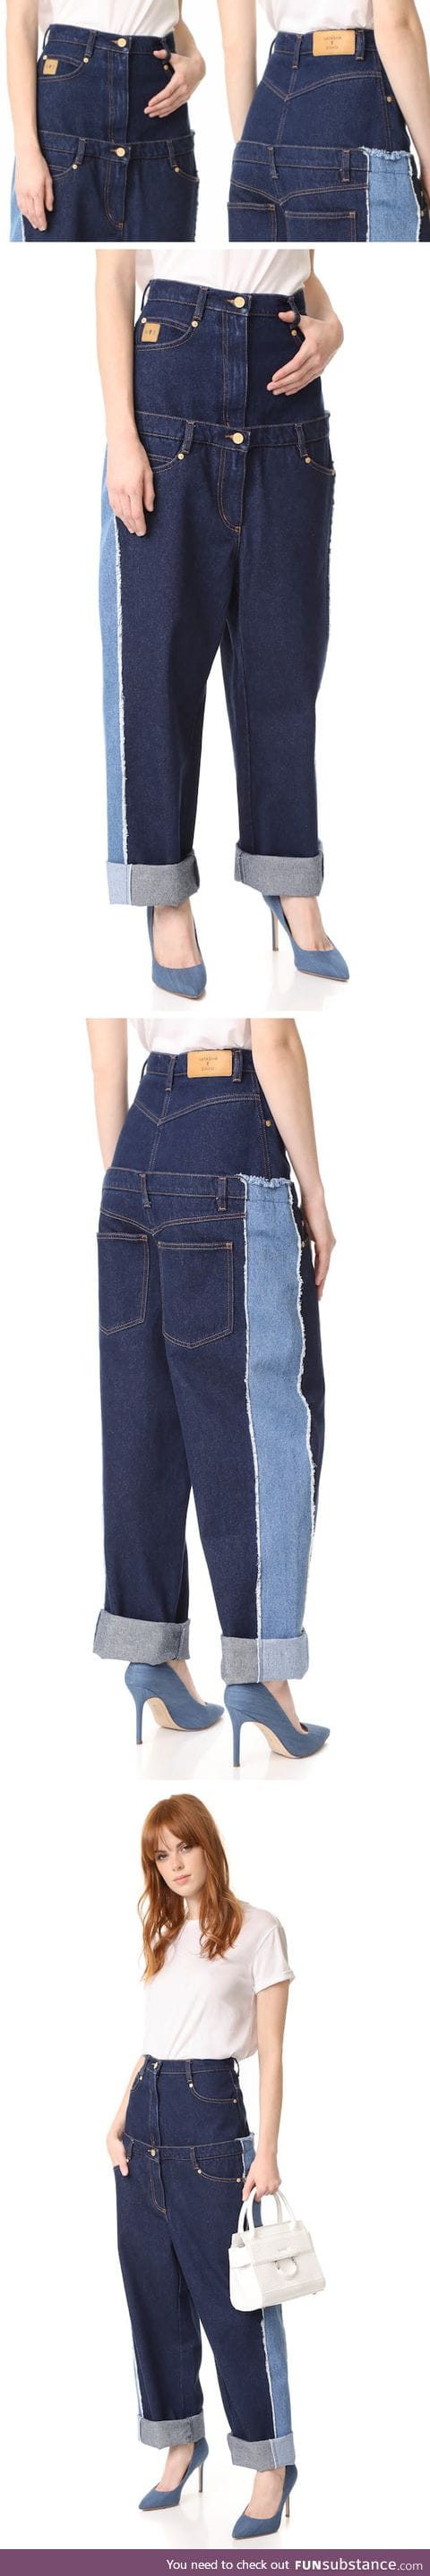 Absurd double-waist jeans are here for those extra-conscious about bum cracks